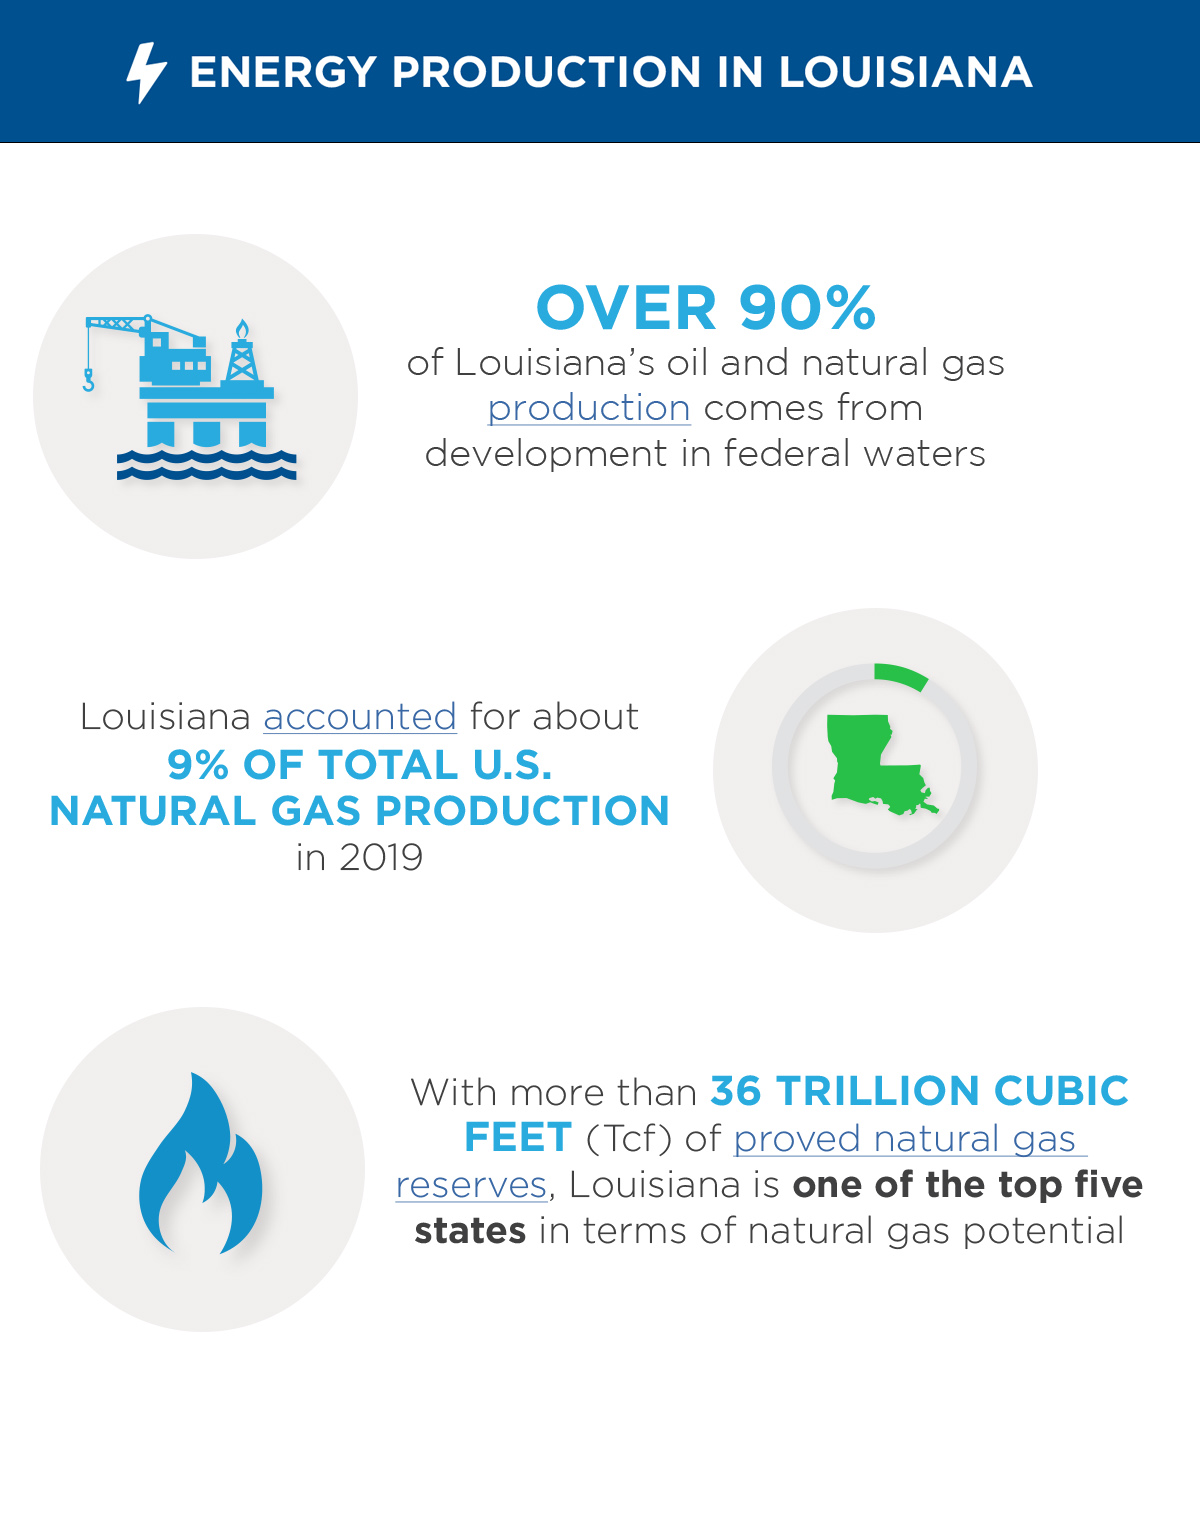 The benefits of natural gas for Louisiana